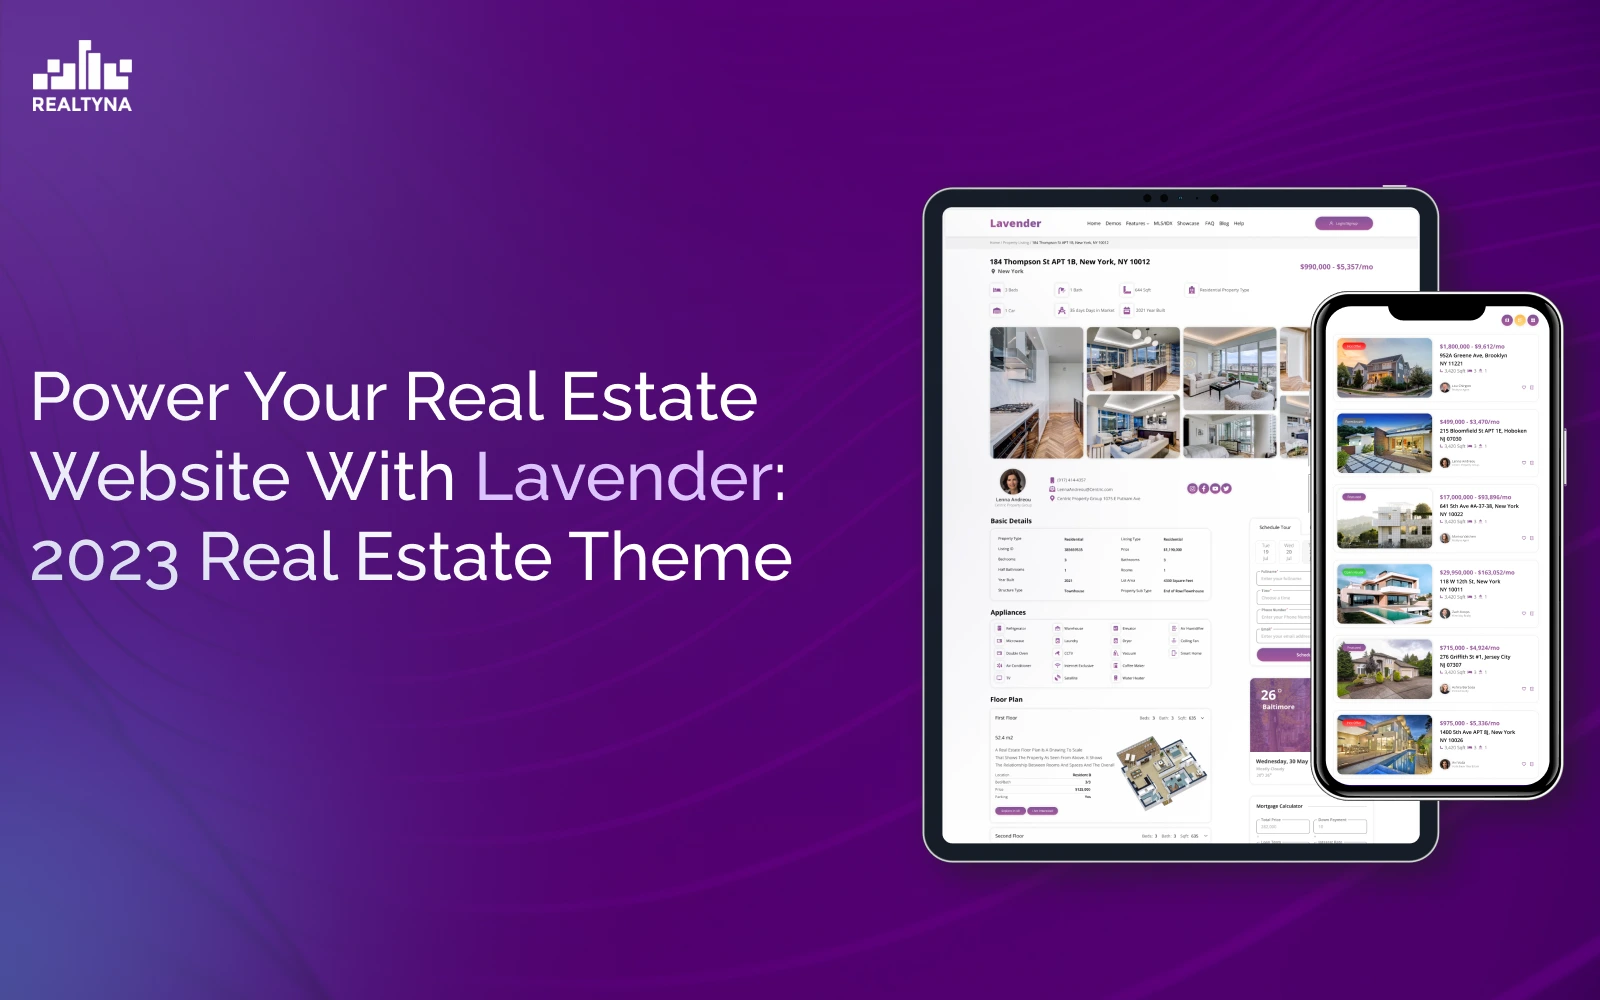 Power Your Real Estate Website With Lavender: 2023 Real Estate Theme